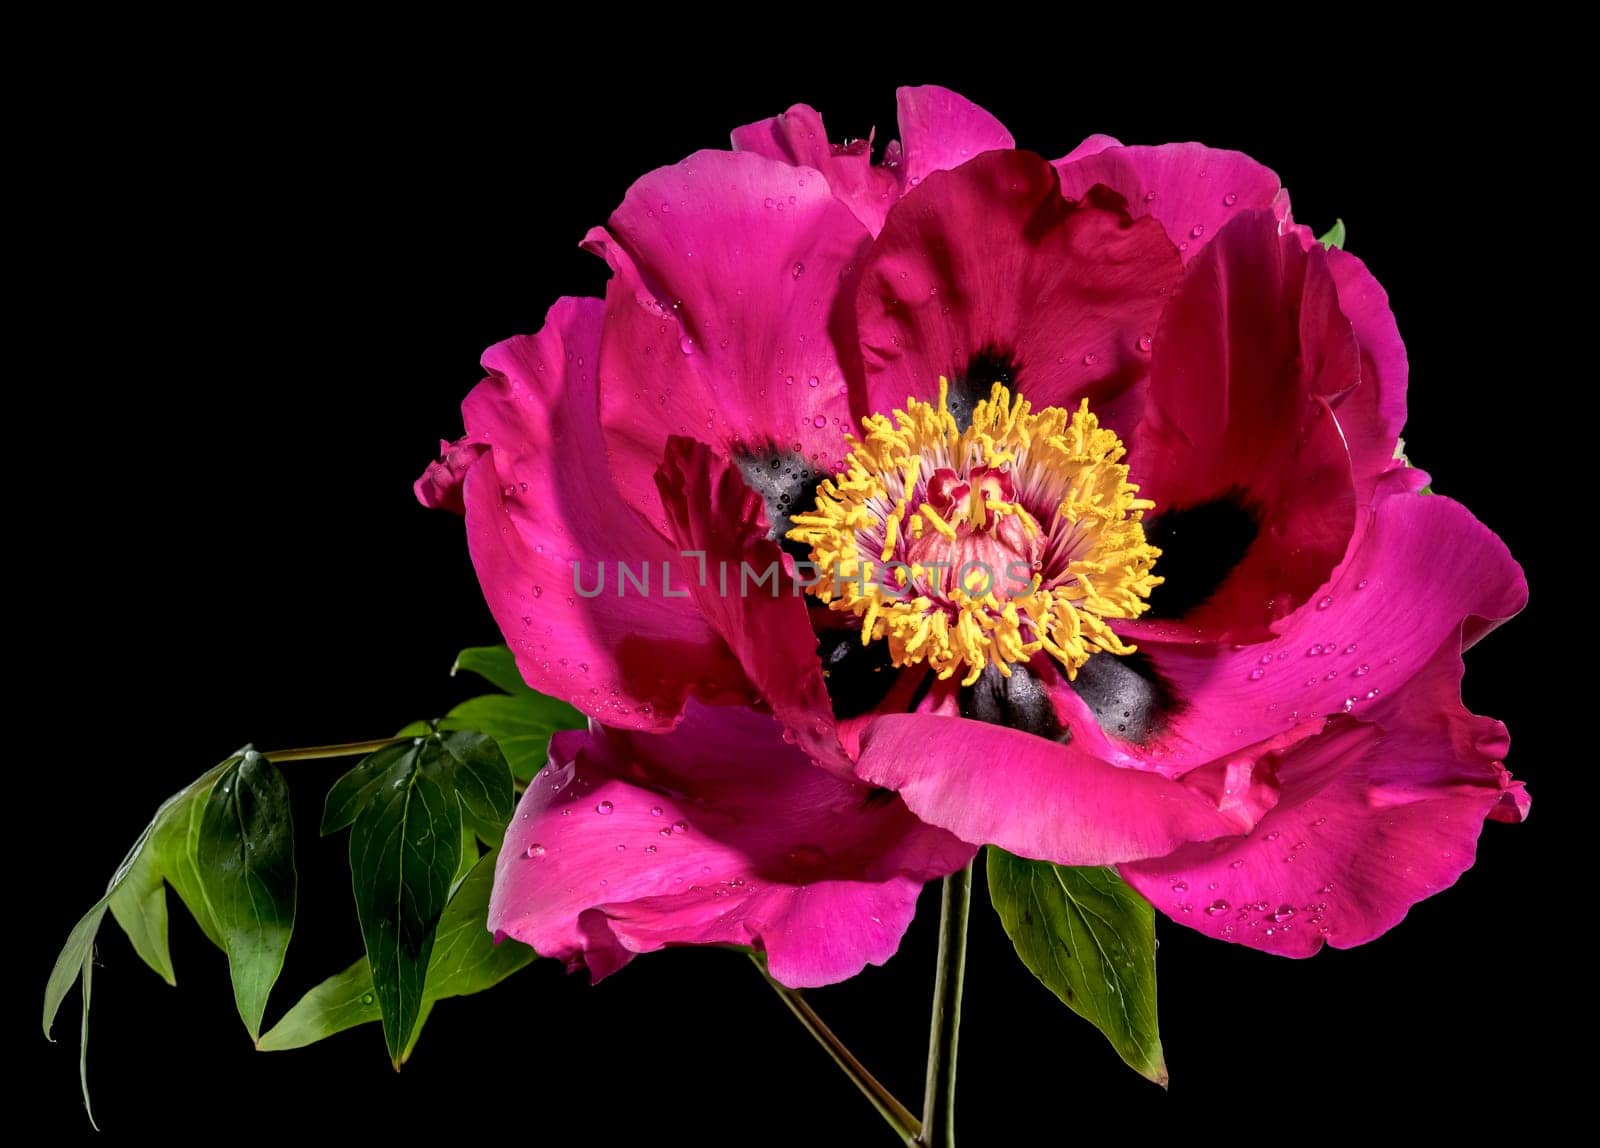 Blooming red peony on a black background by Multipedia